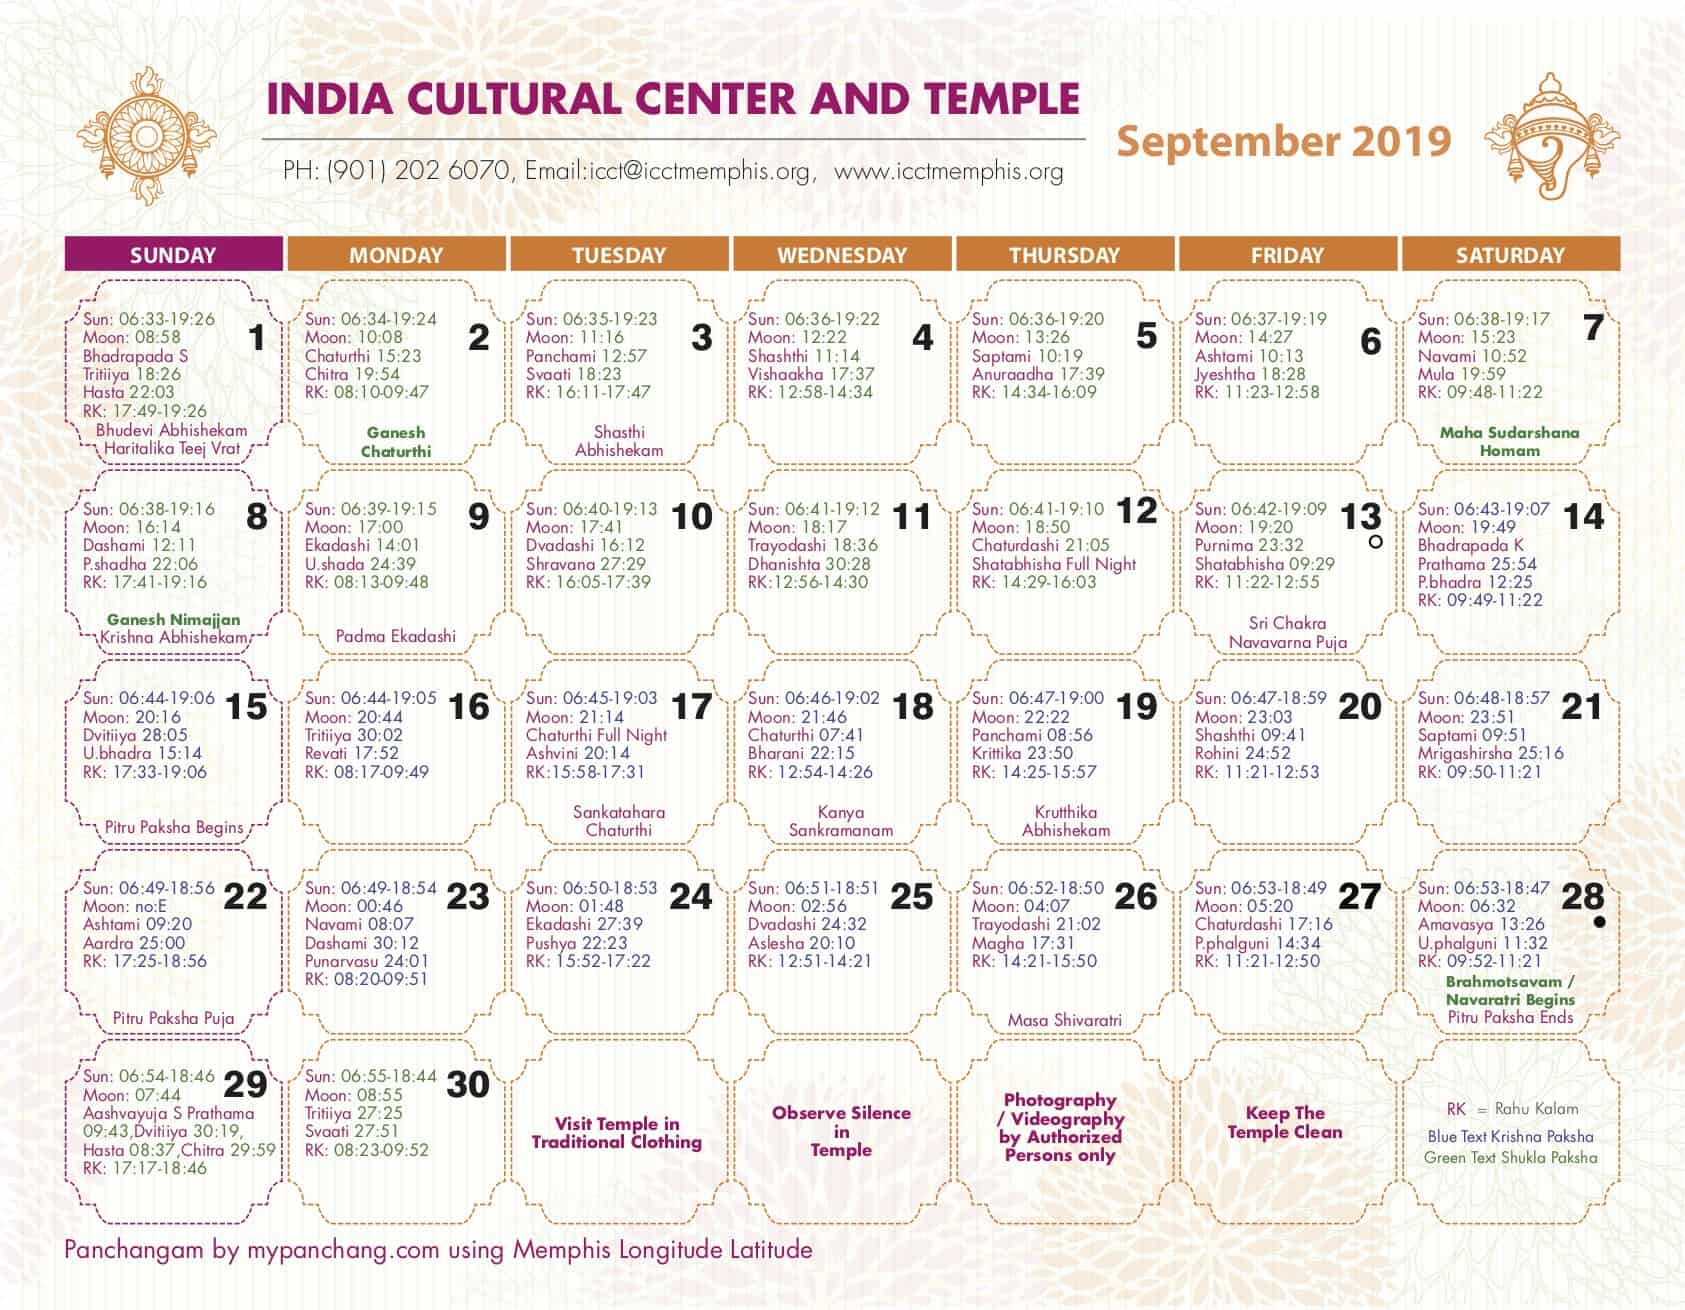 Temple Calendar India Cultural Center and Temple